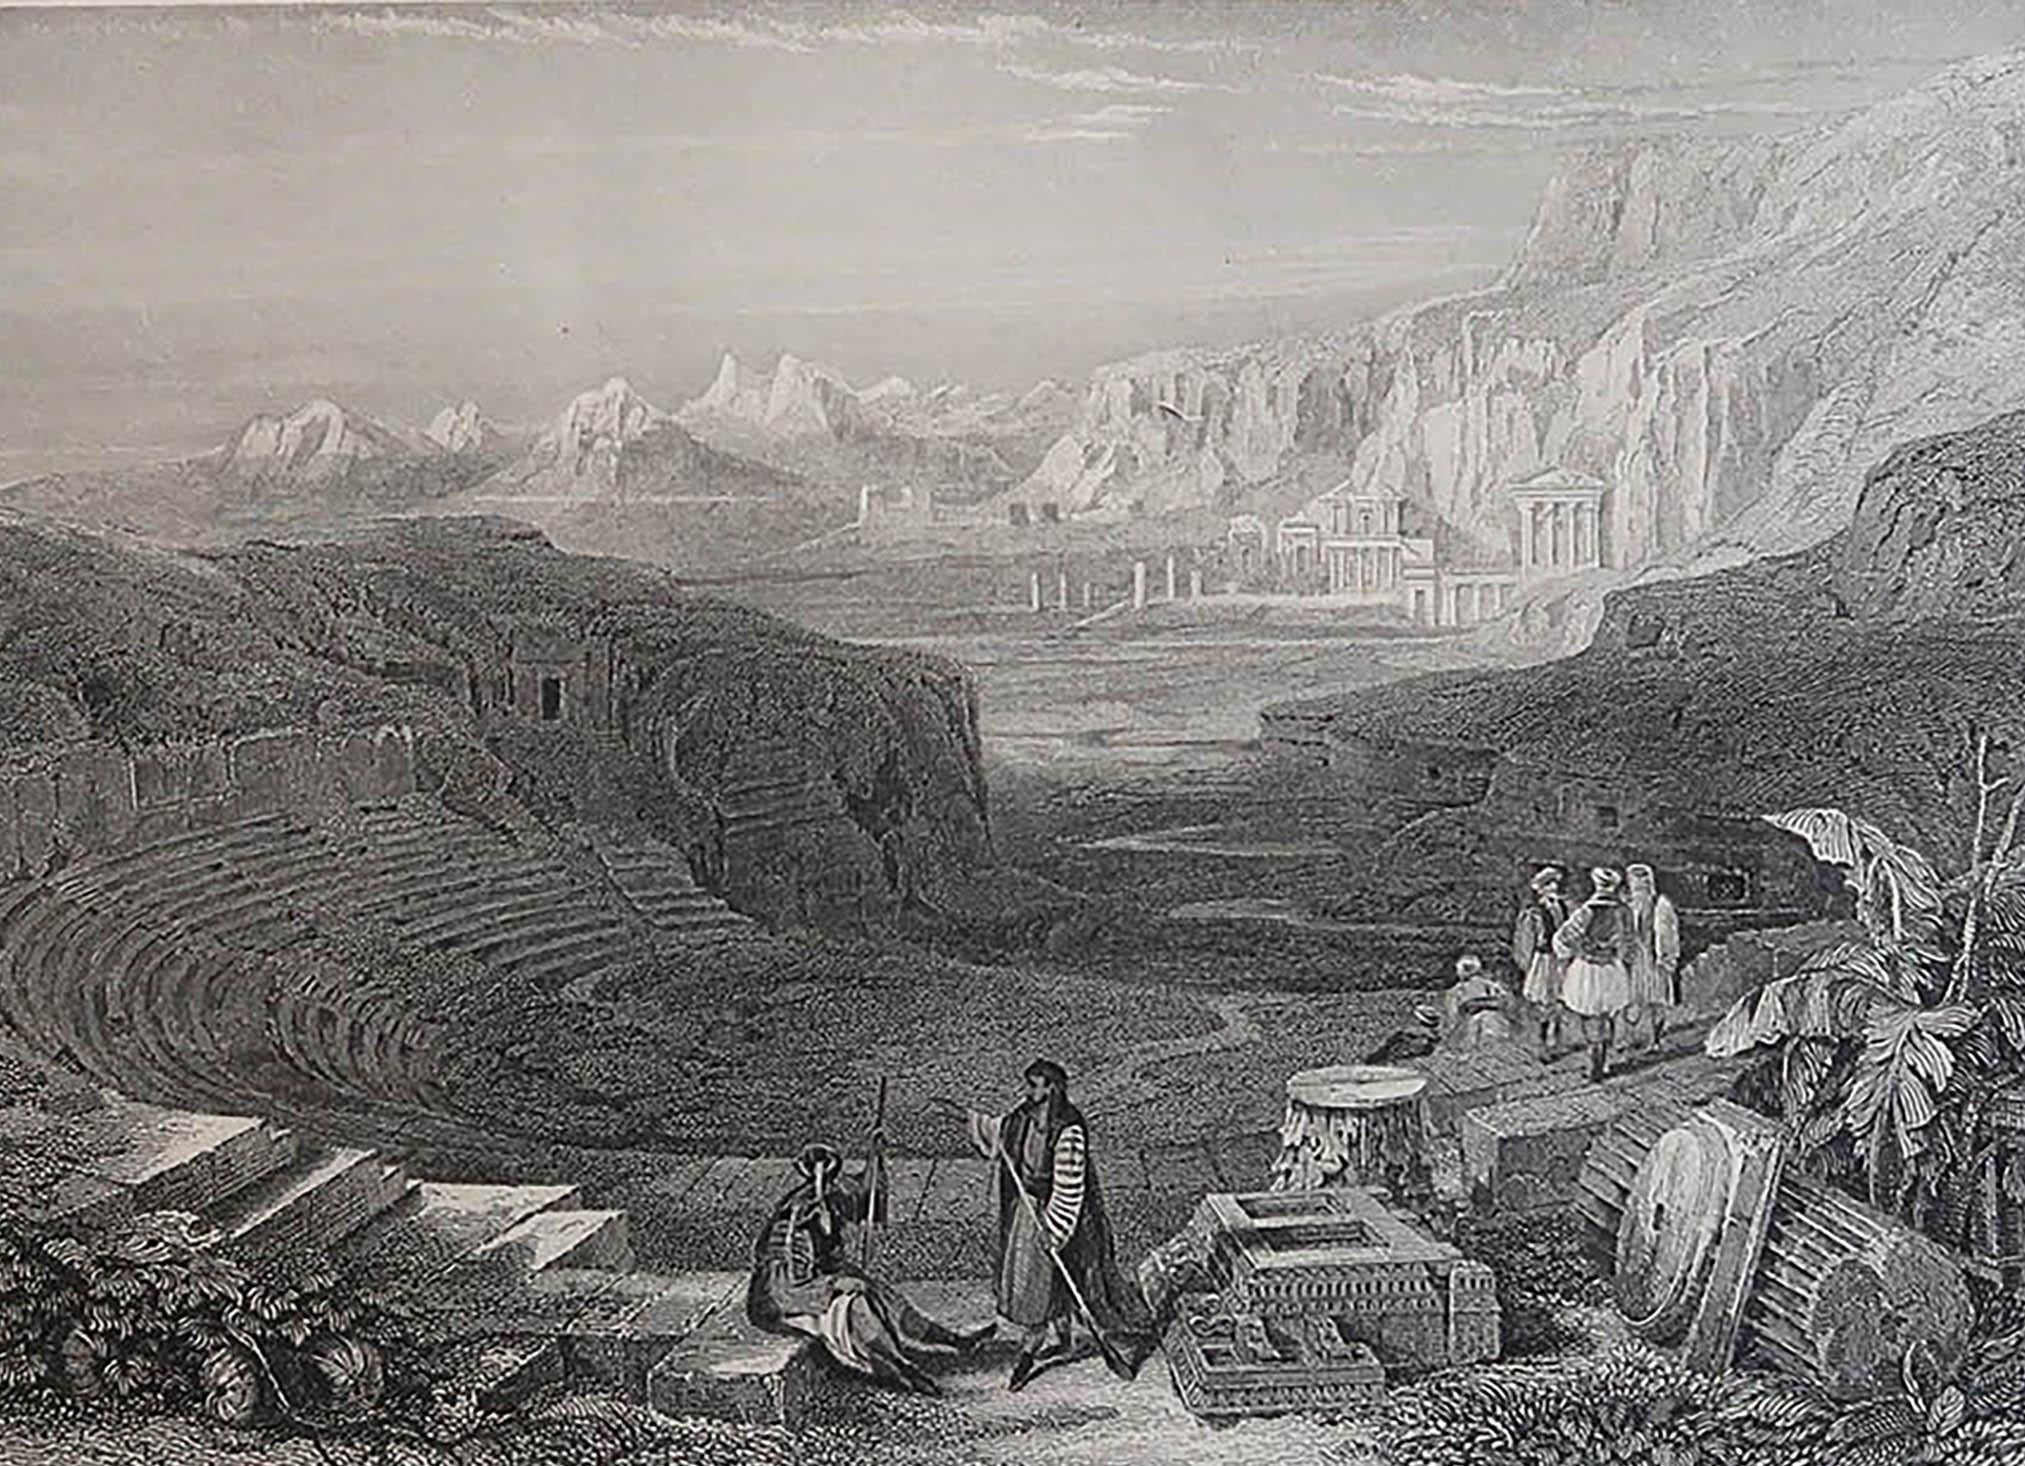 Wonderful image of Petra, Jordan

Fine steel engraving after David Roberts

Published circa 1850

The measurement given is the paper size

Unframed.

